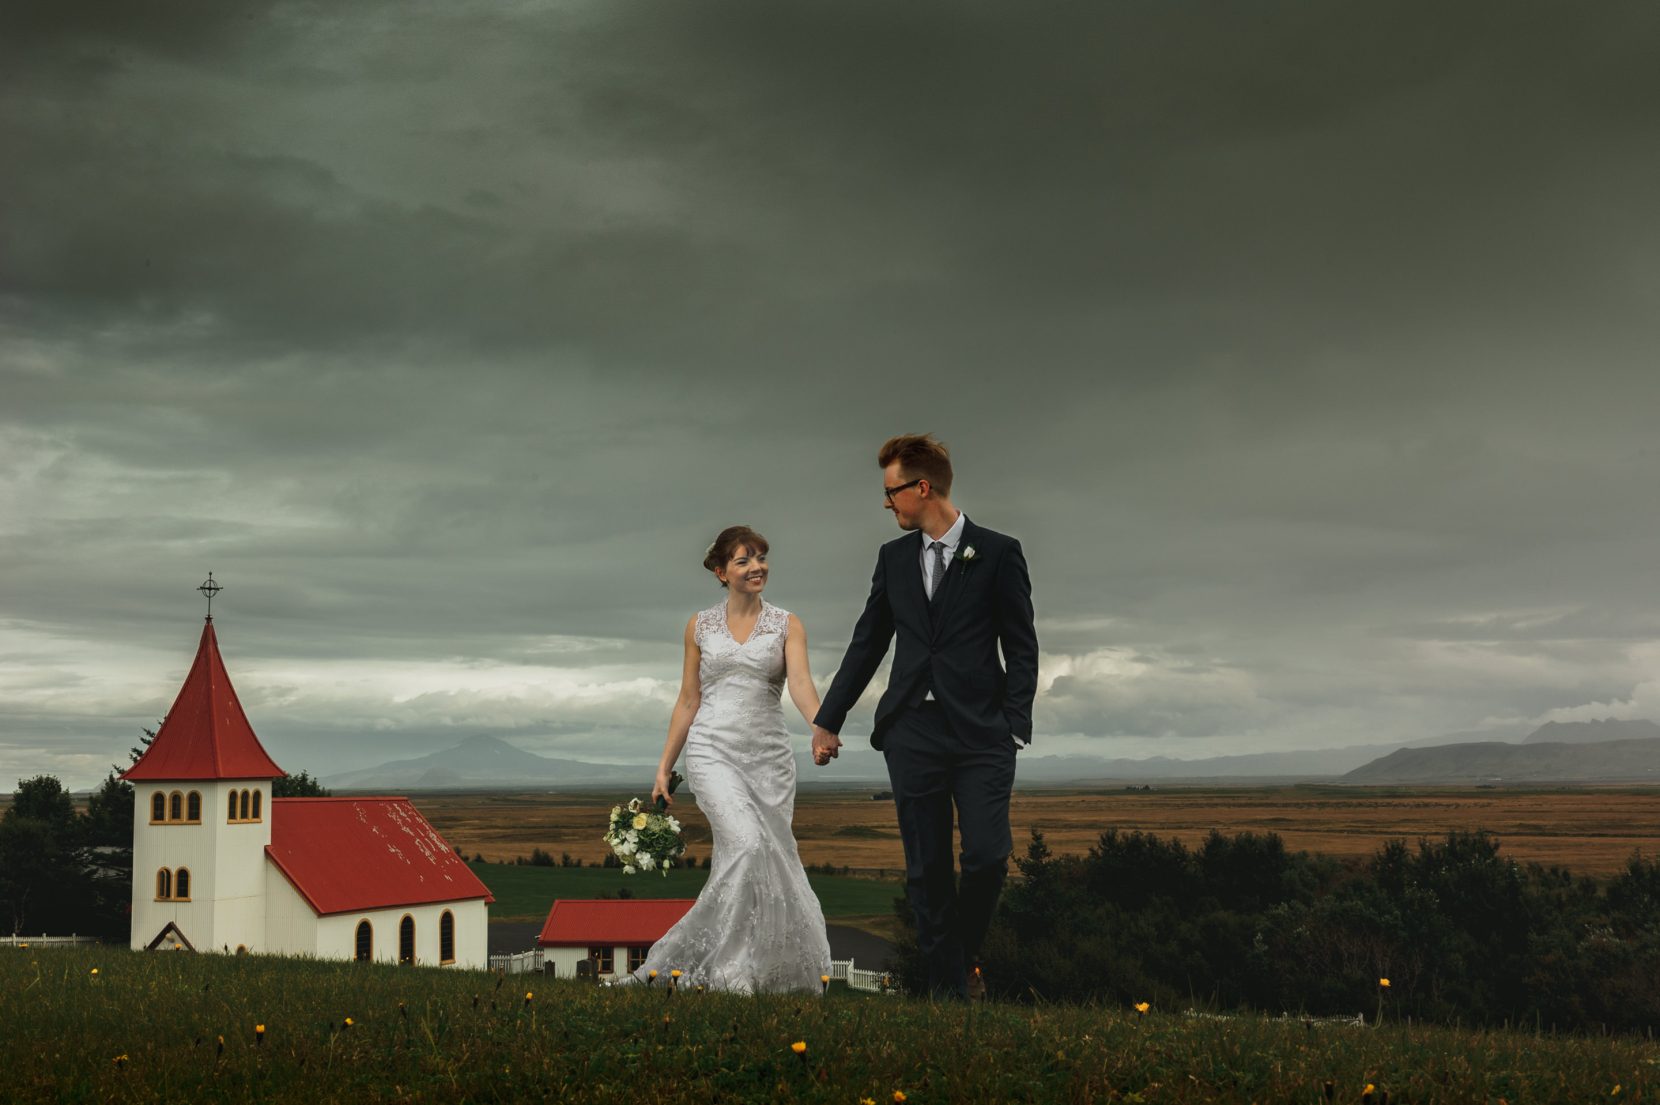 walking couple front of church storm clouds hella iceland outdoor